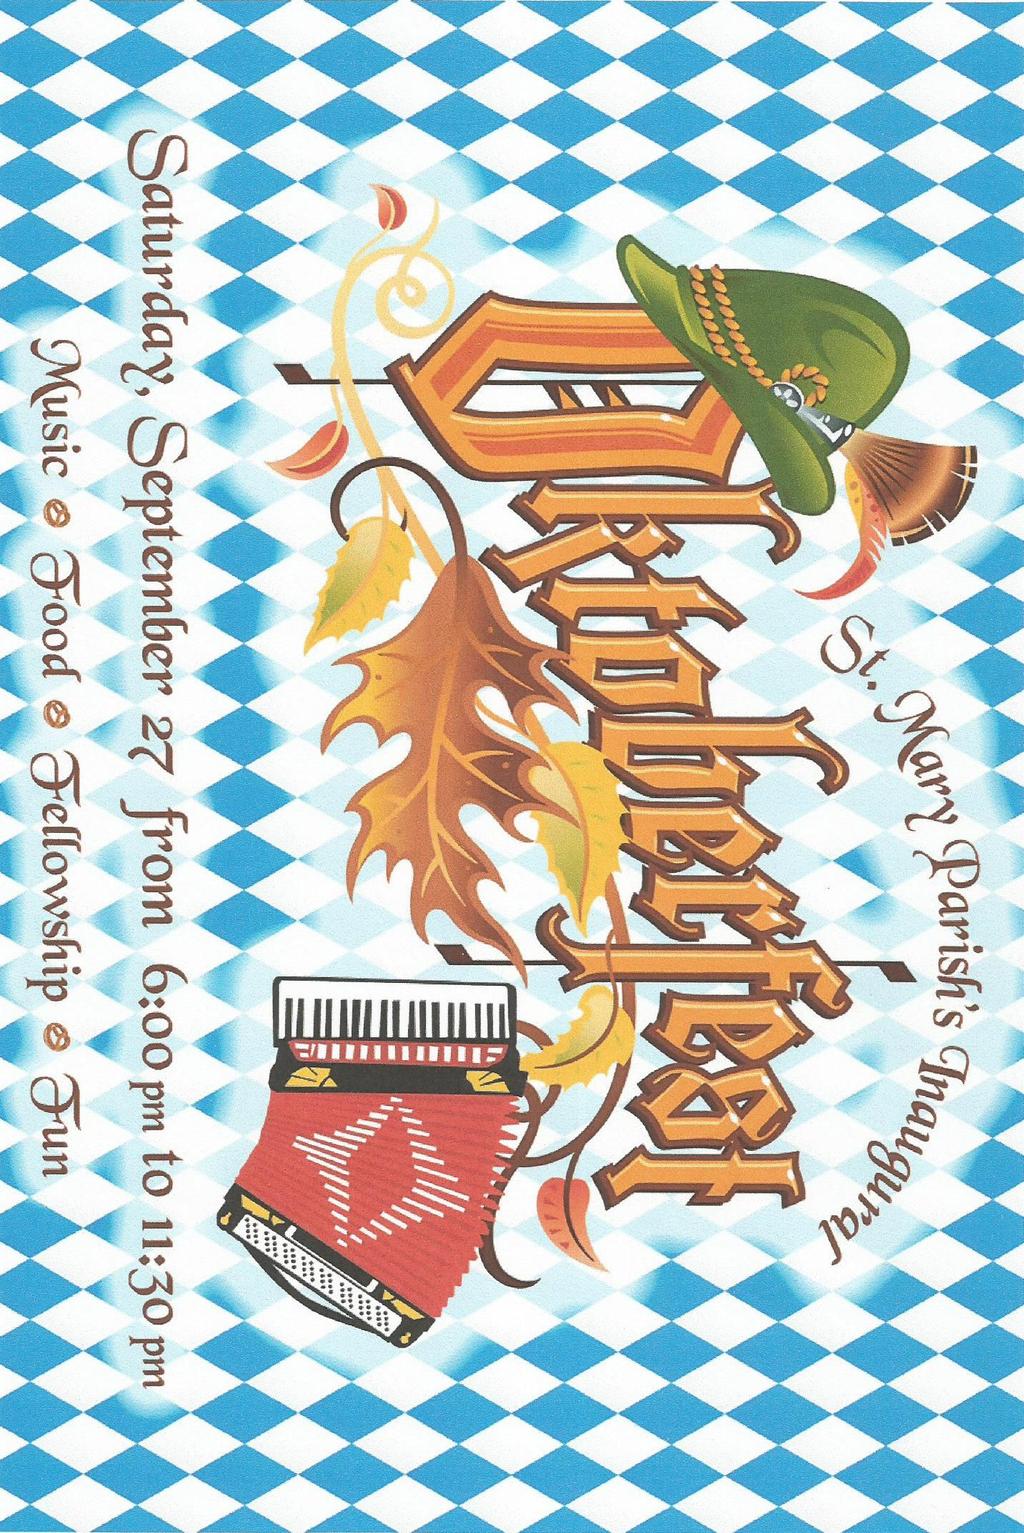 TICKETS FOR OKTOBERFEST ARE $25 PER PERSON (ADULTS ONLY) OR $30 AT THE DOOR.